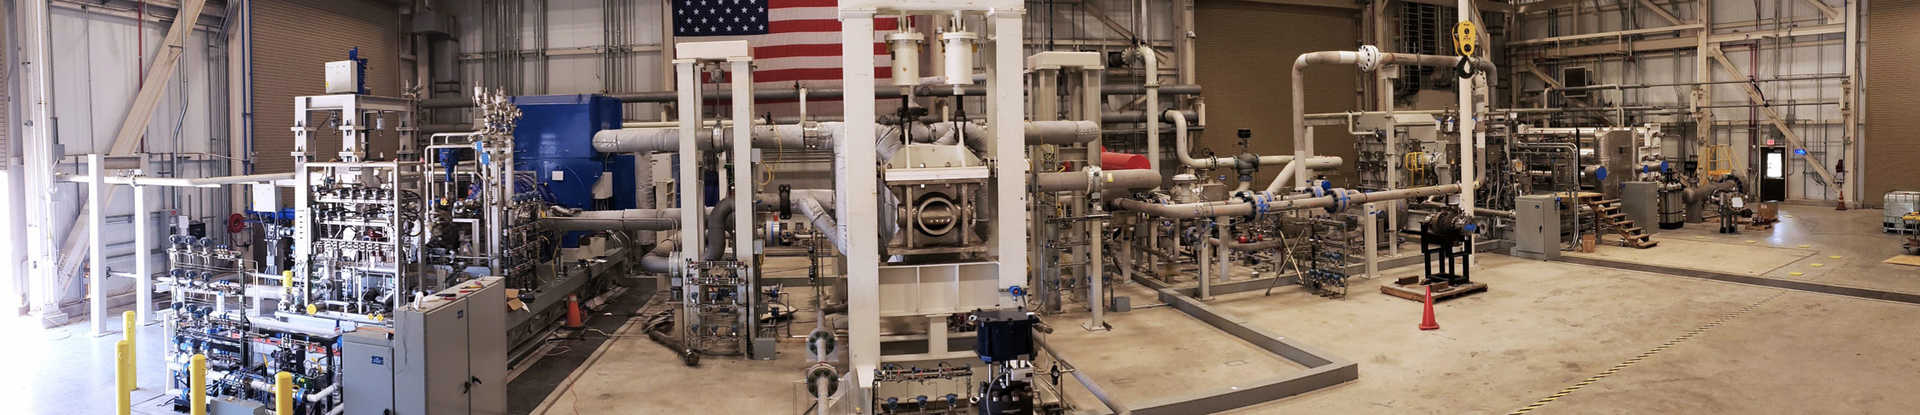 Go to SwRI Press Release: STEP Demo supercritical CO2 pilot plant generates electricity for the first time